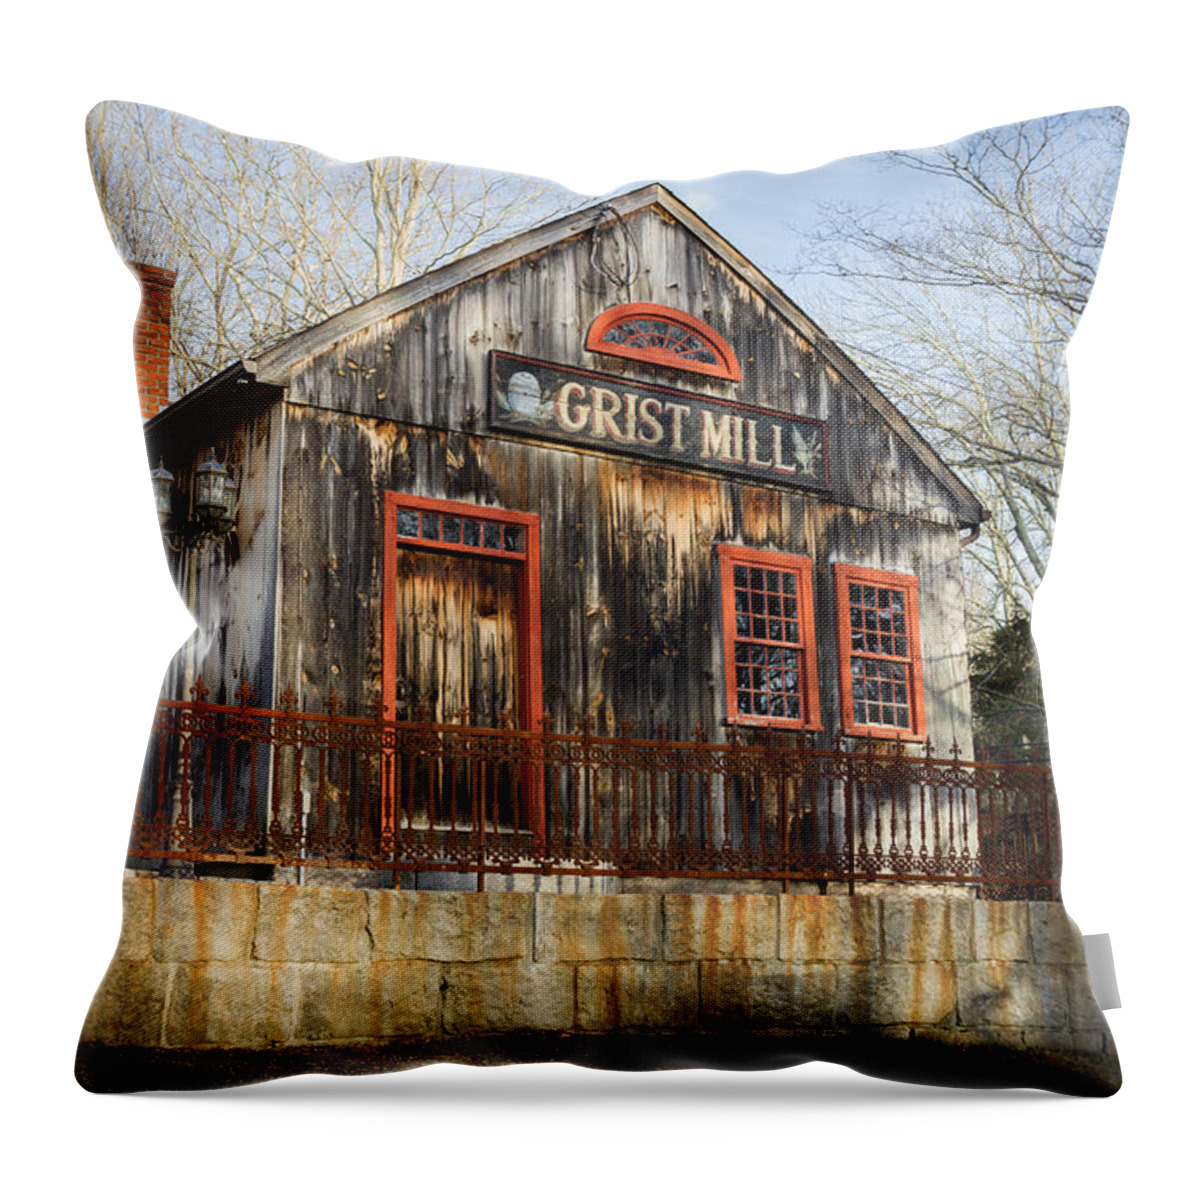 Grist Mill Throw Pillow featuring the photograph Grist Mill by Kirkodd Photography Of New England